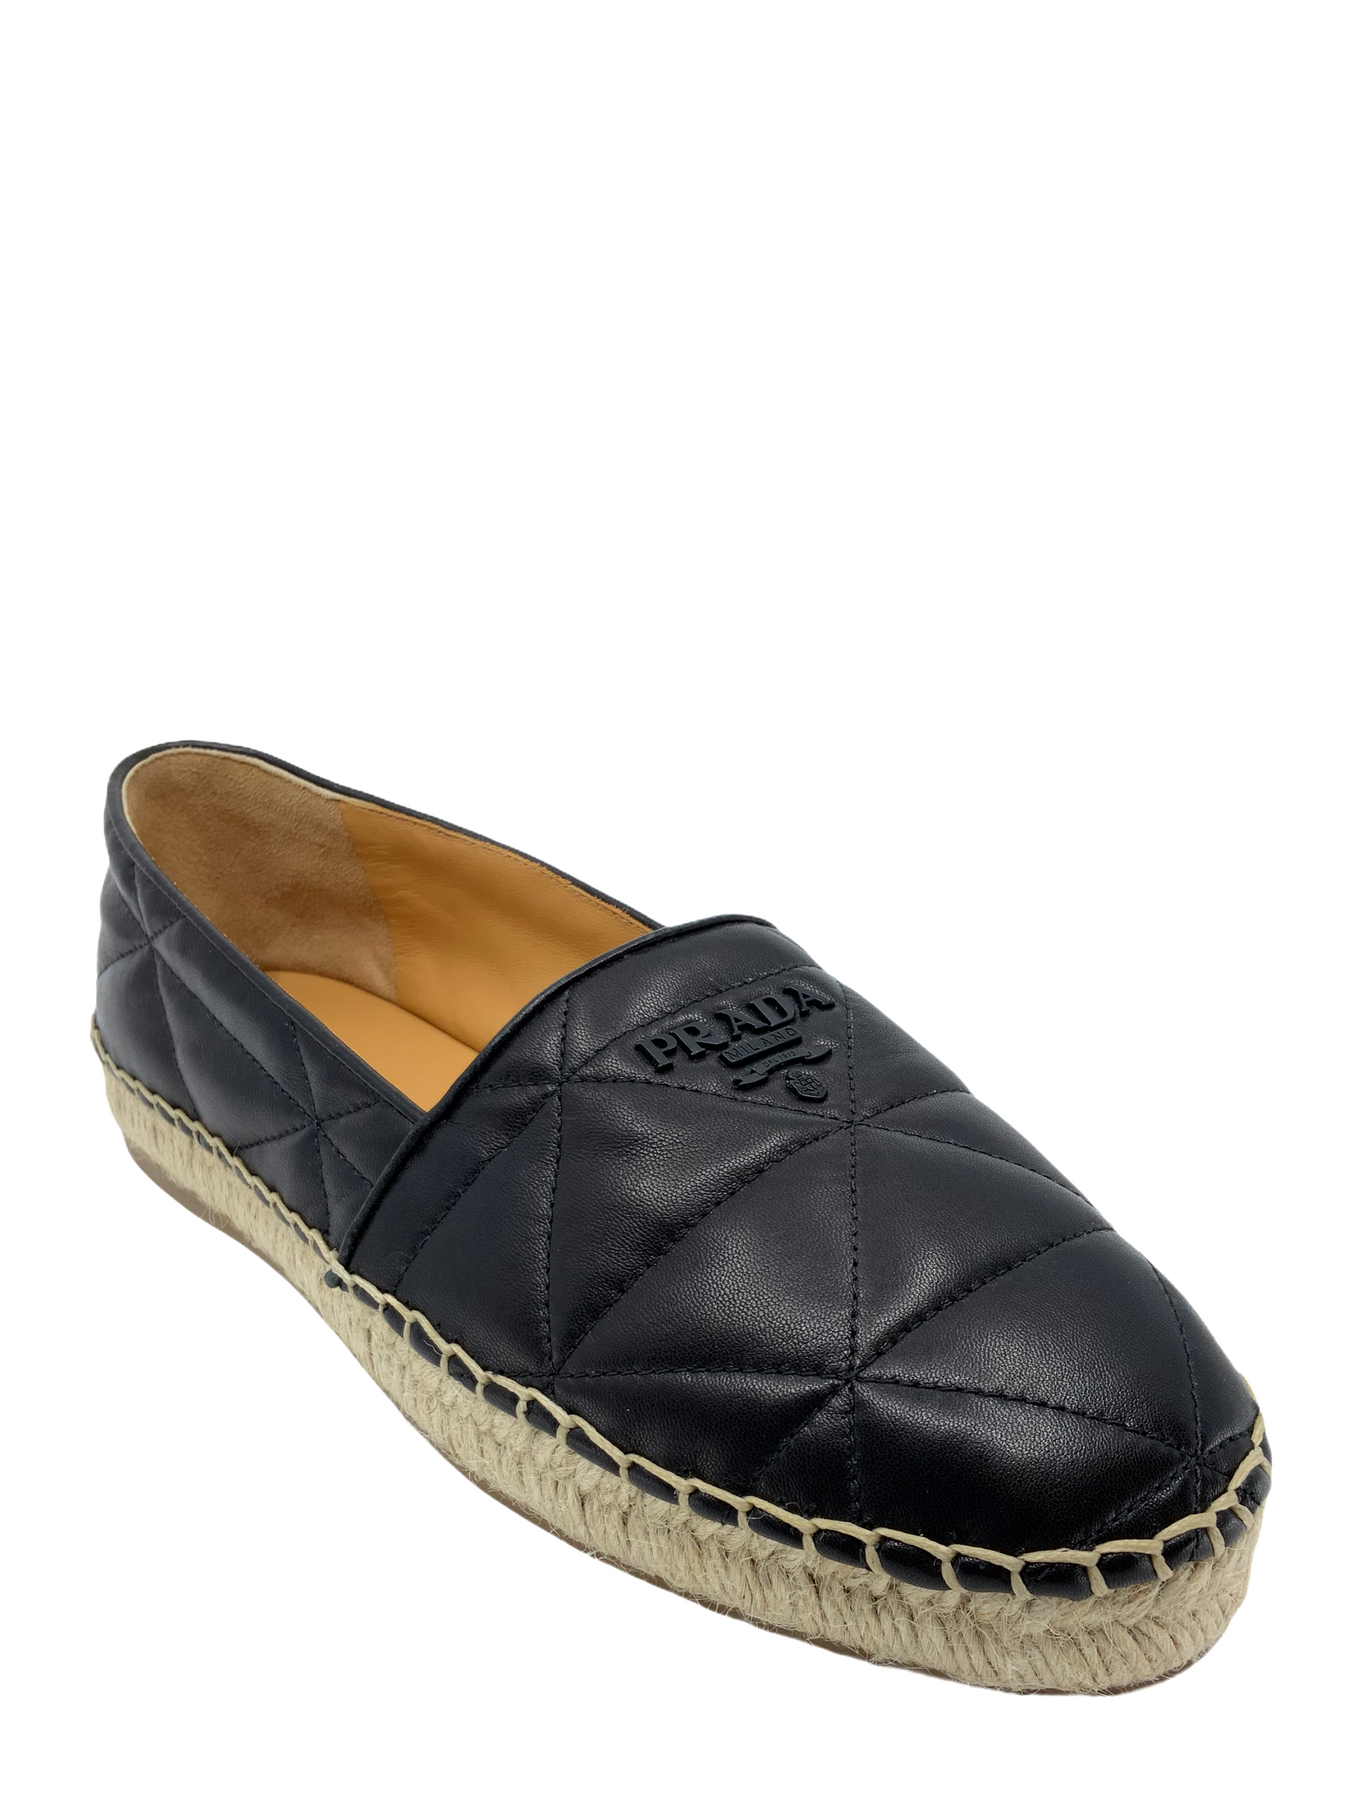 Prada Quilted Leather Espadrilles Size 10 NEW